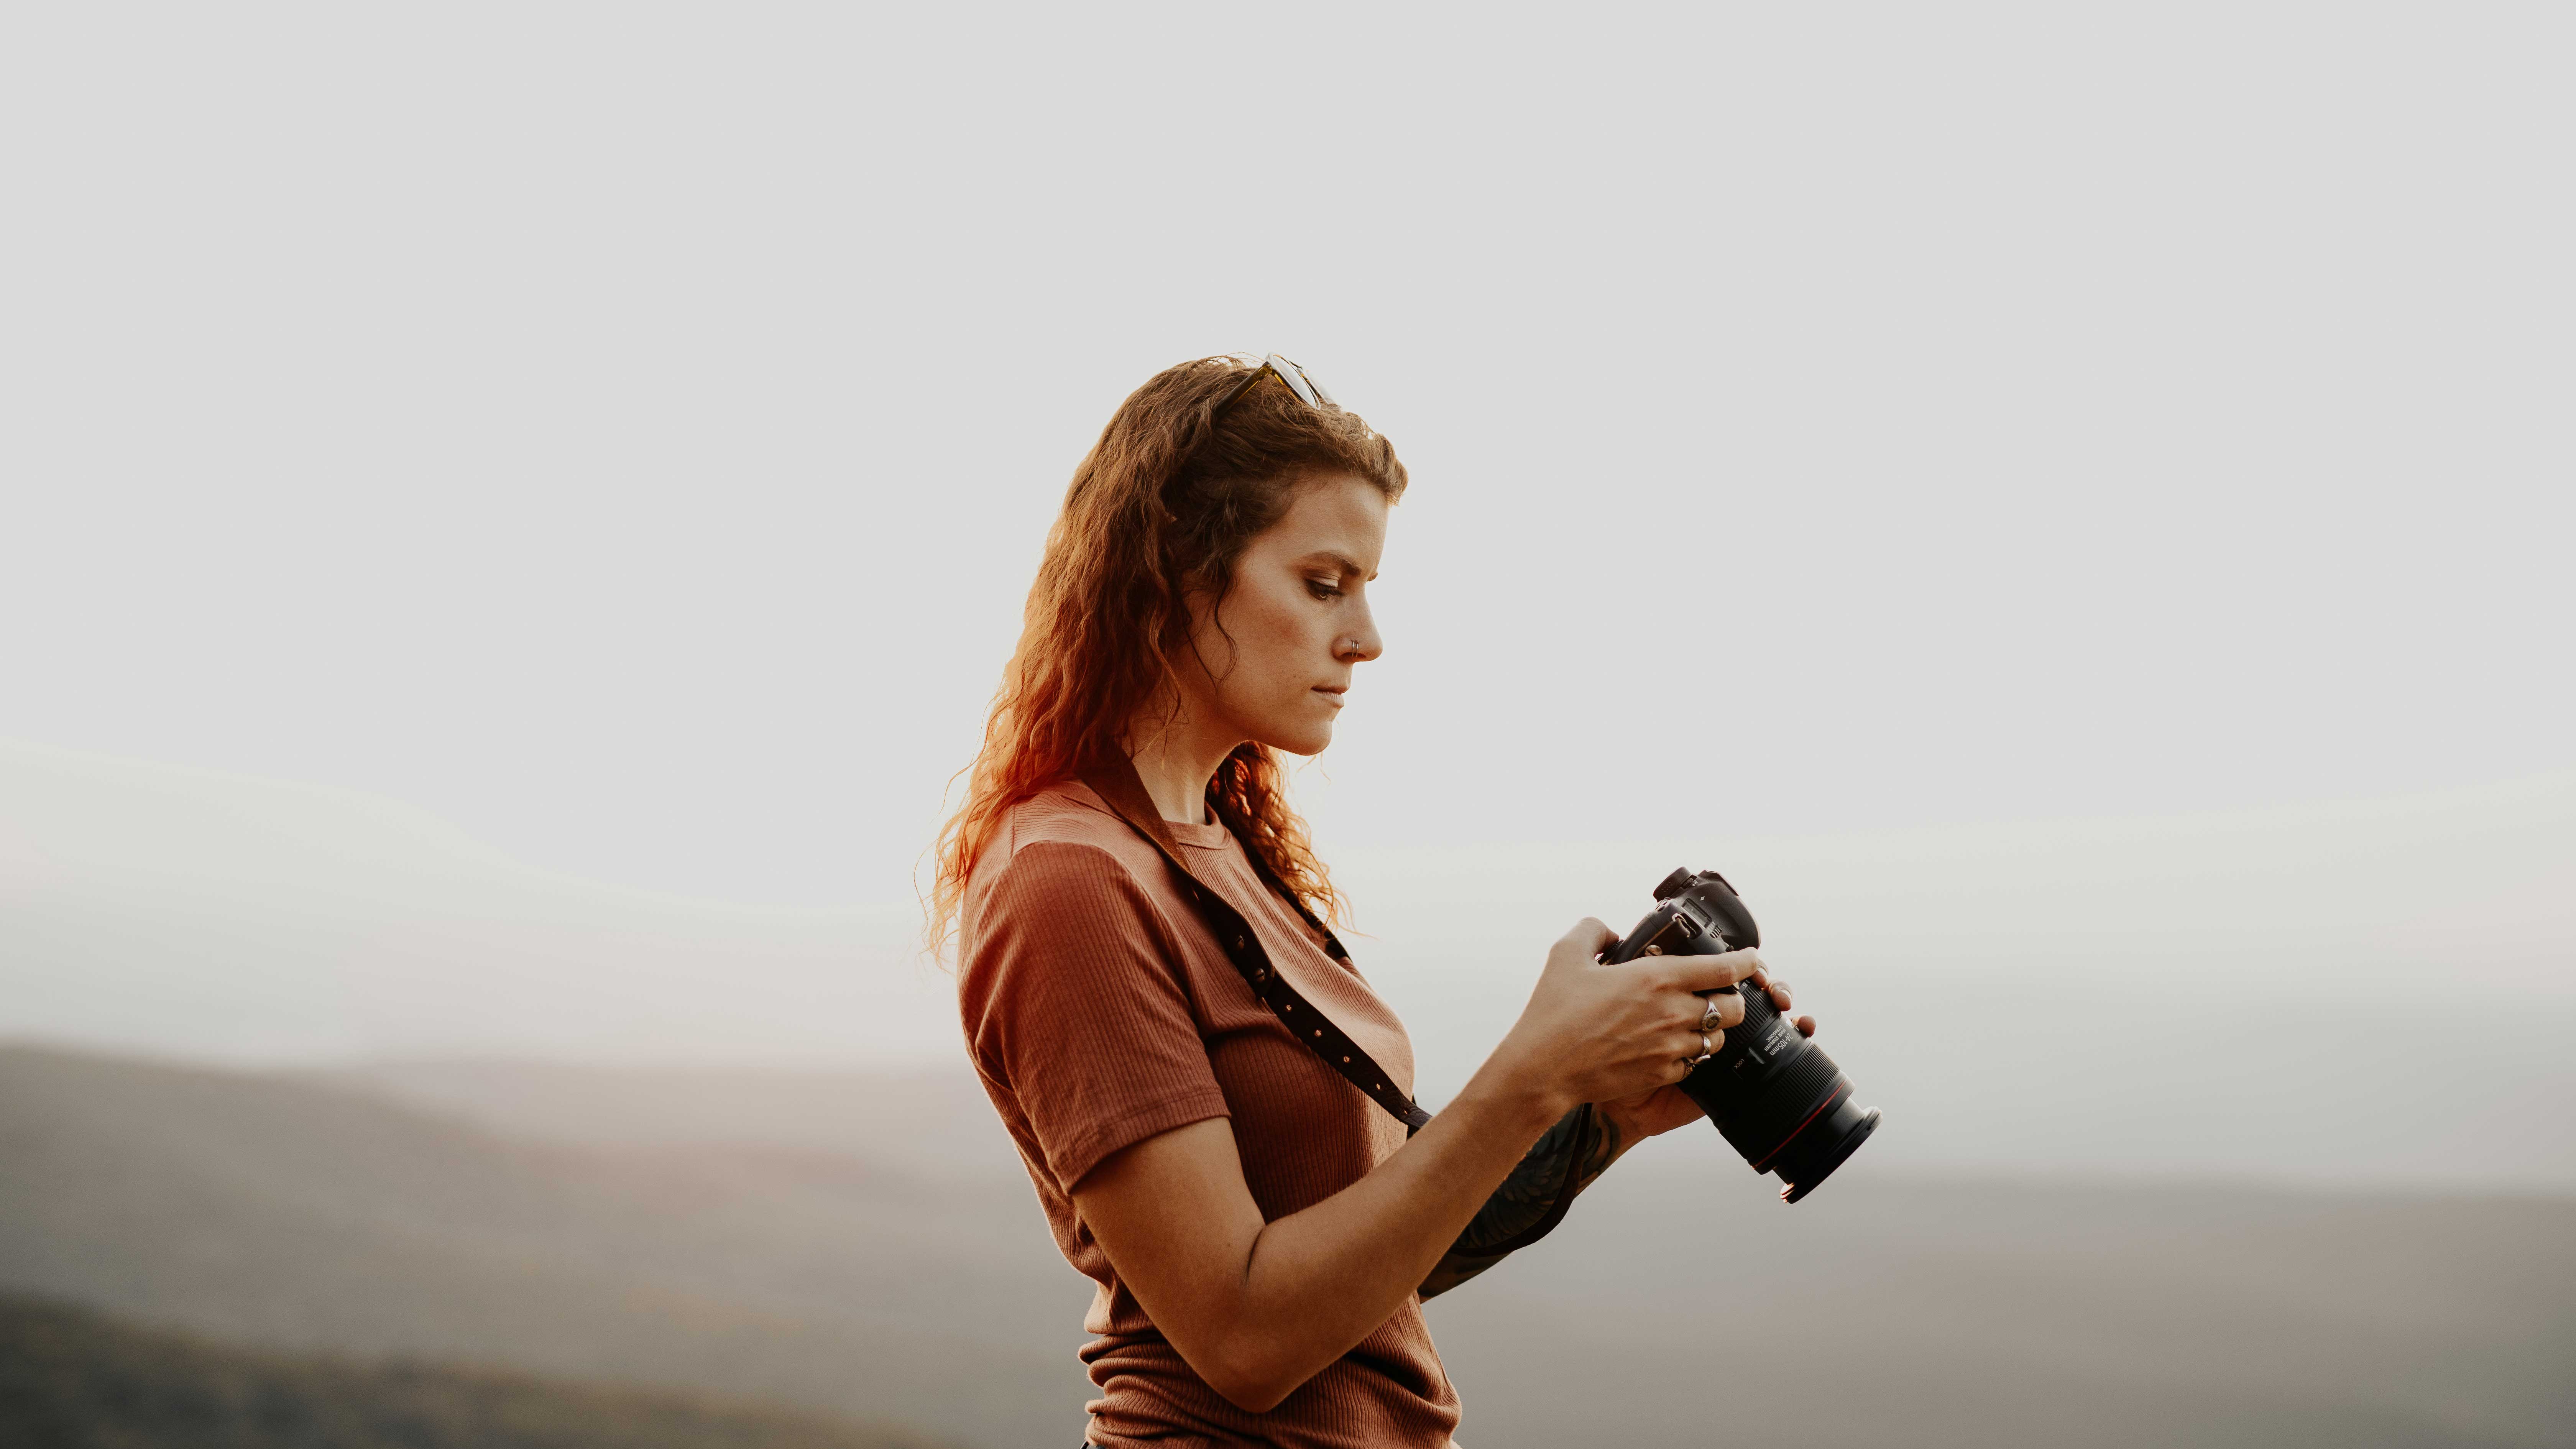 A woman looking at her camera after taking a picture in a foggy landscape.